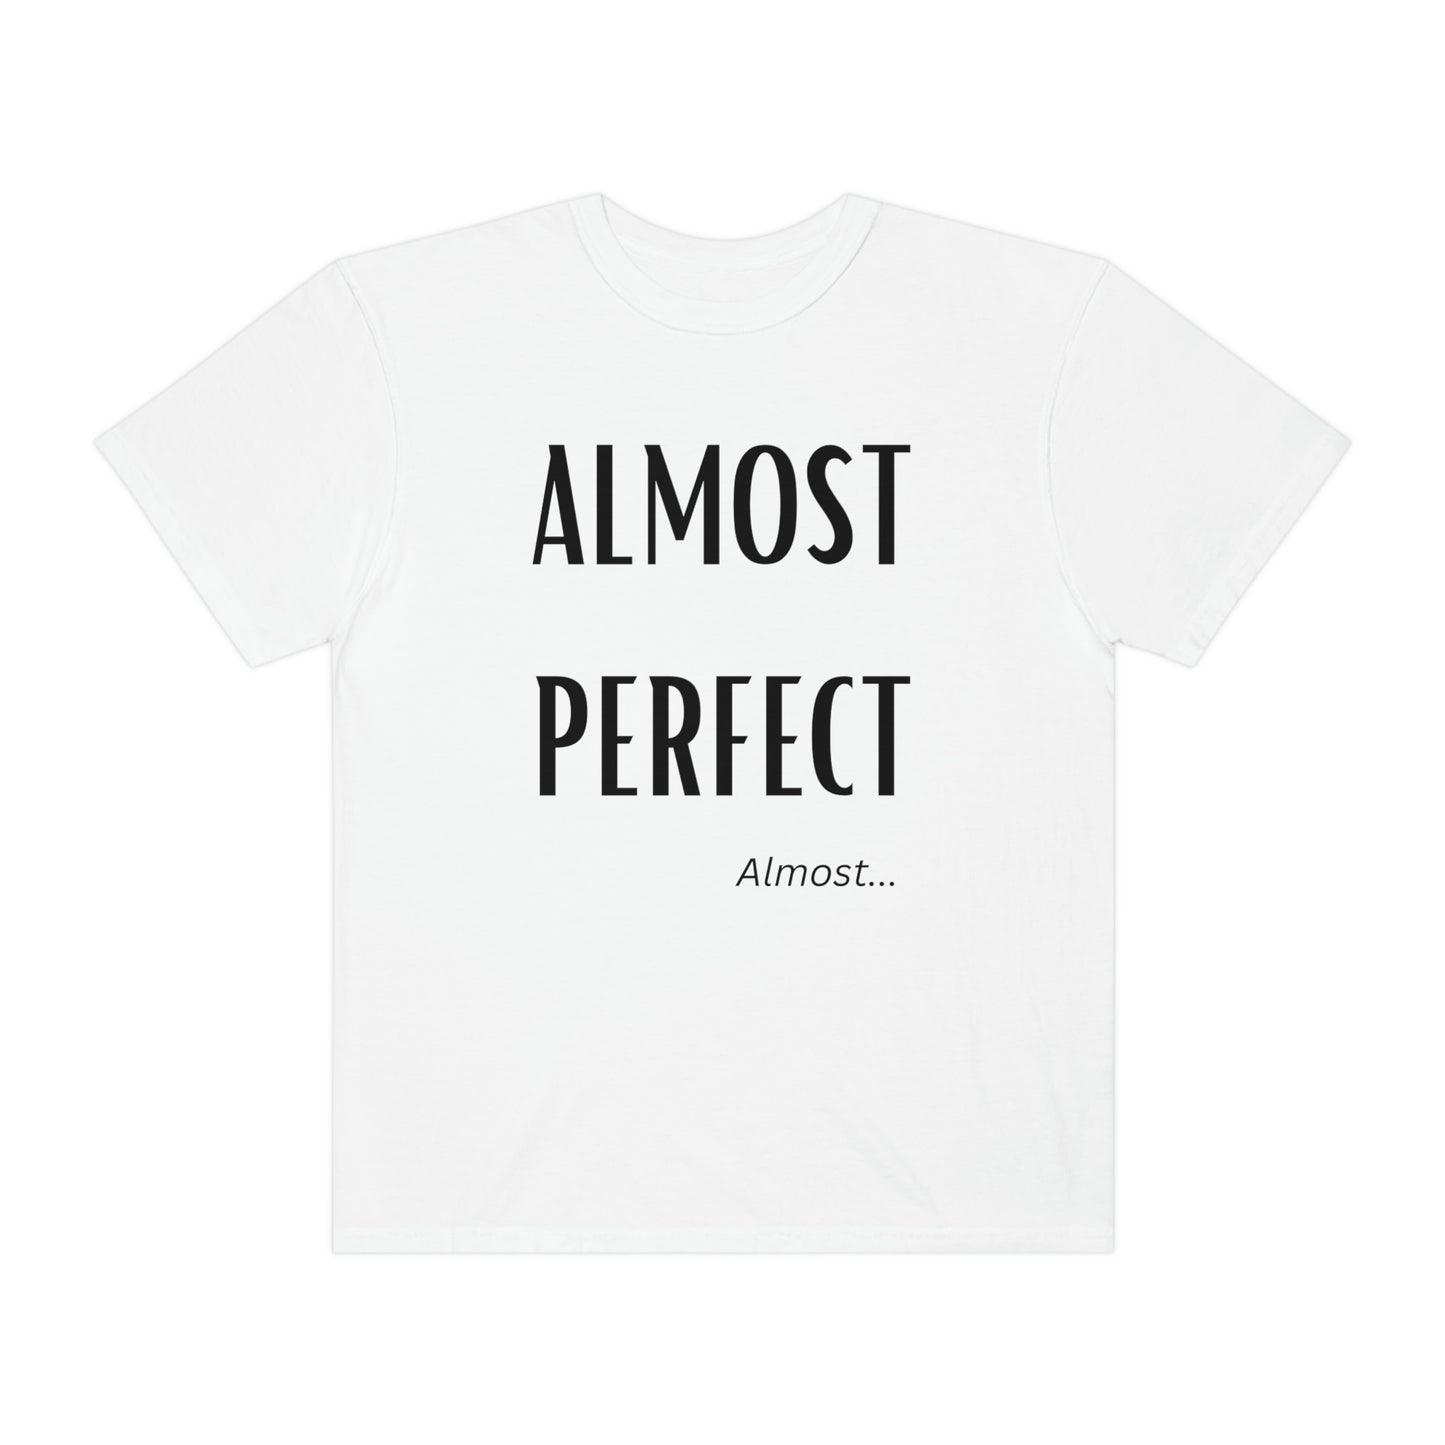 Almost Perfect Unisex Garment-Dyed T-shirt